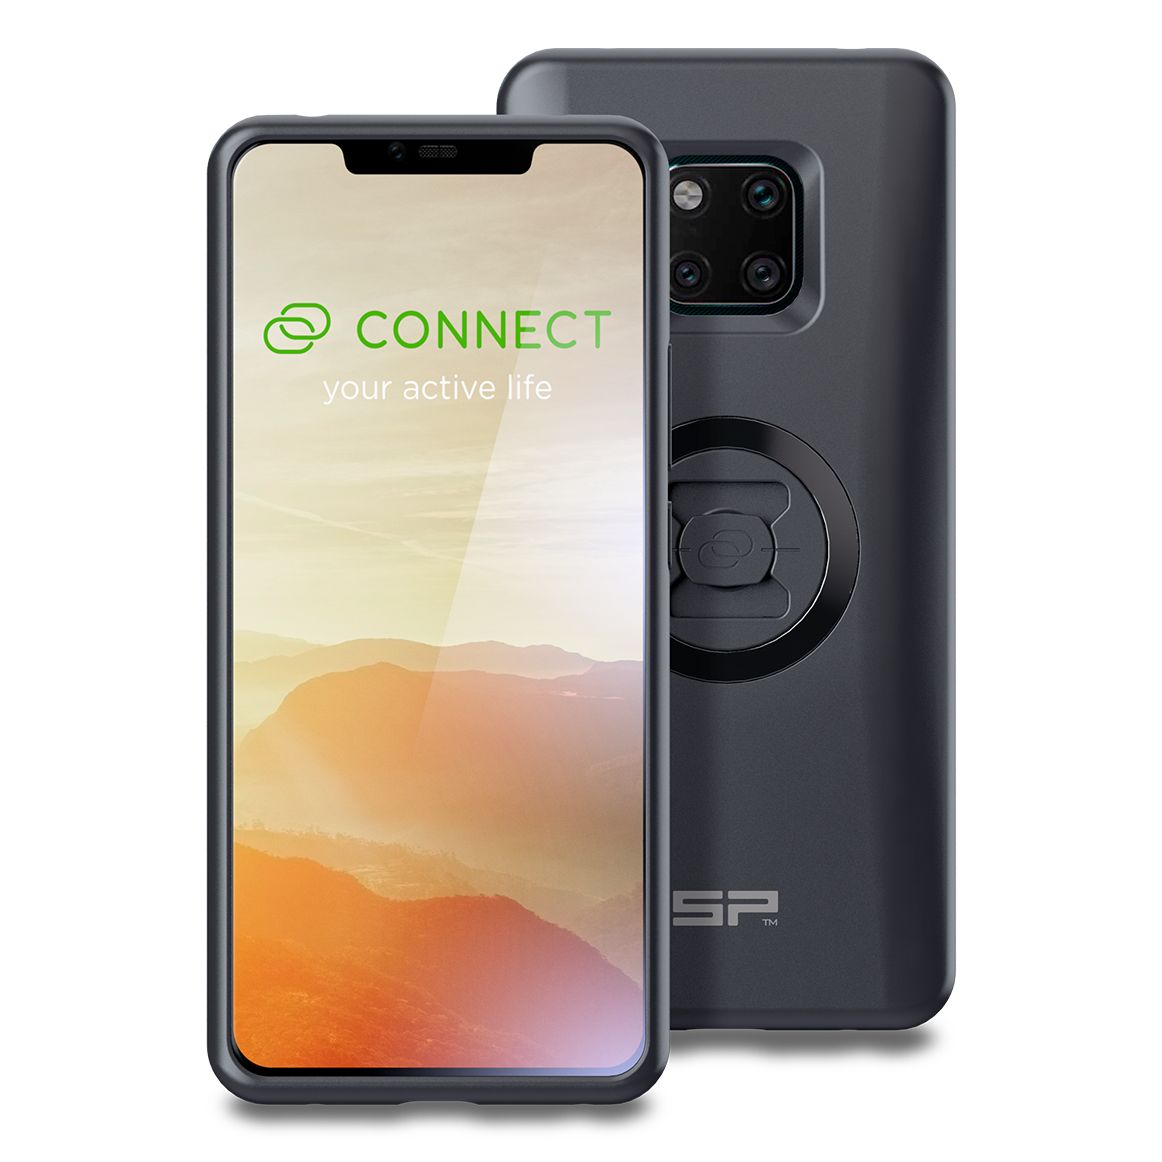 Image of Coque de protection SP Connect HUAWEI MATE20 PRO